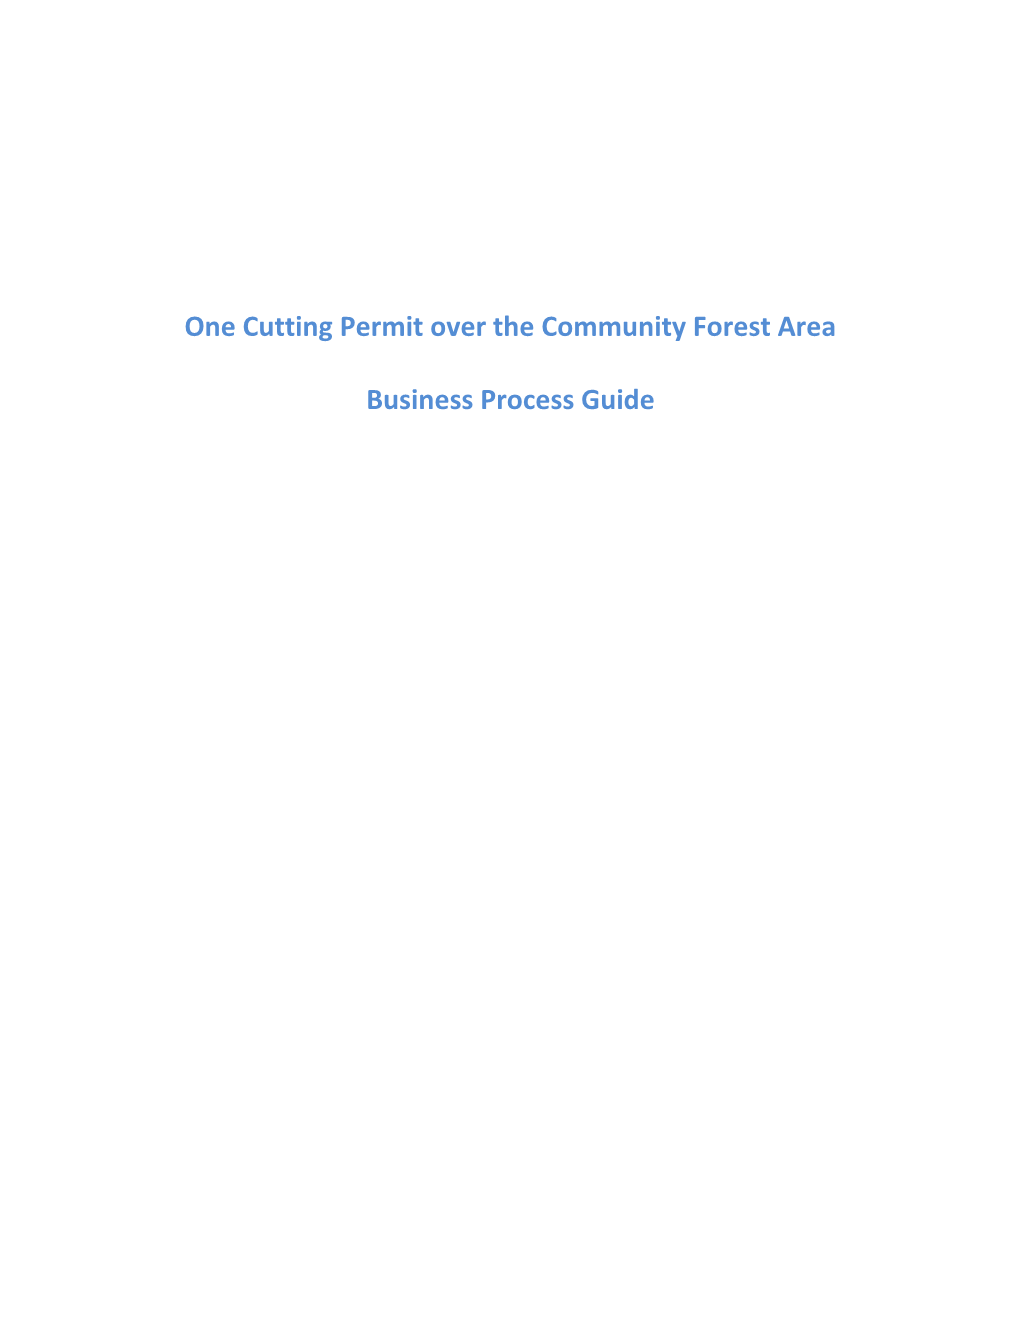 One Cutting Permit Over the Community Forest Area